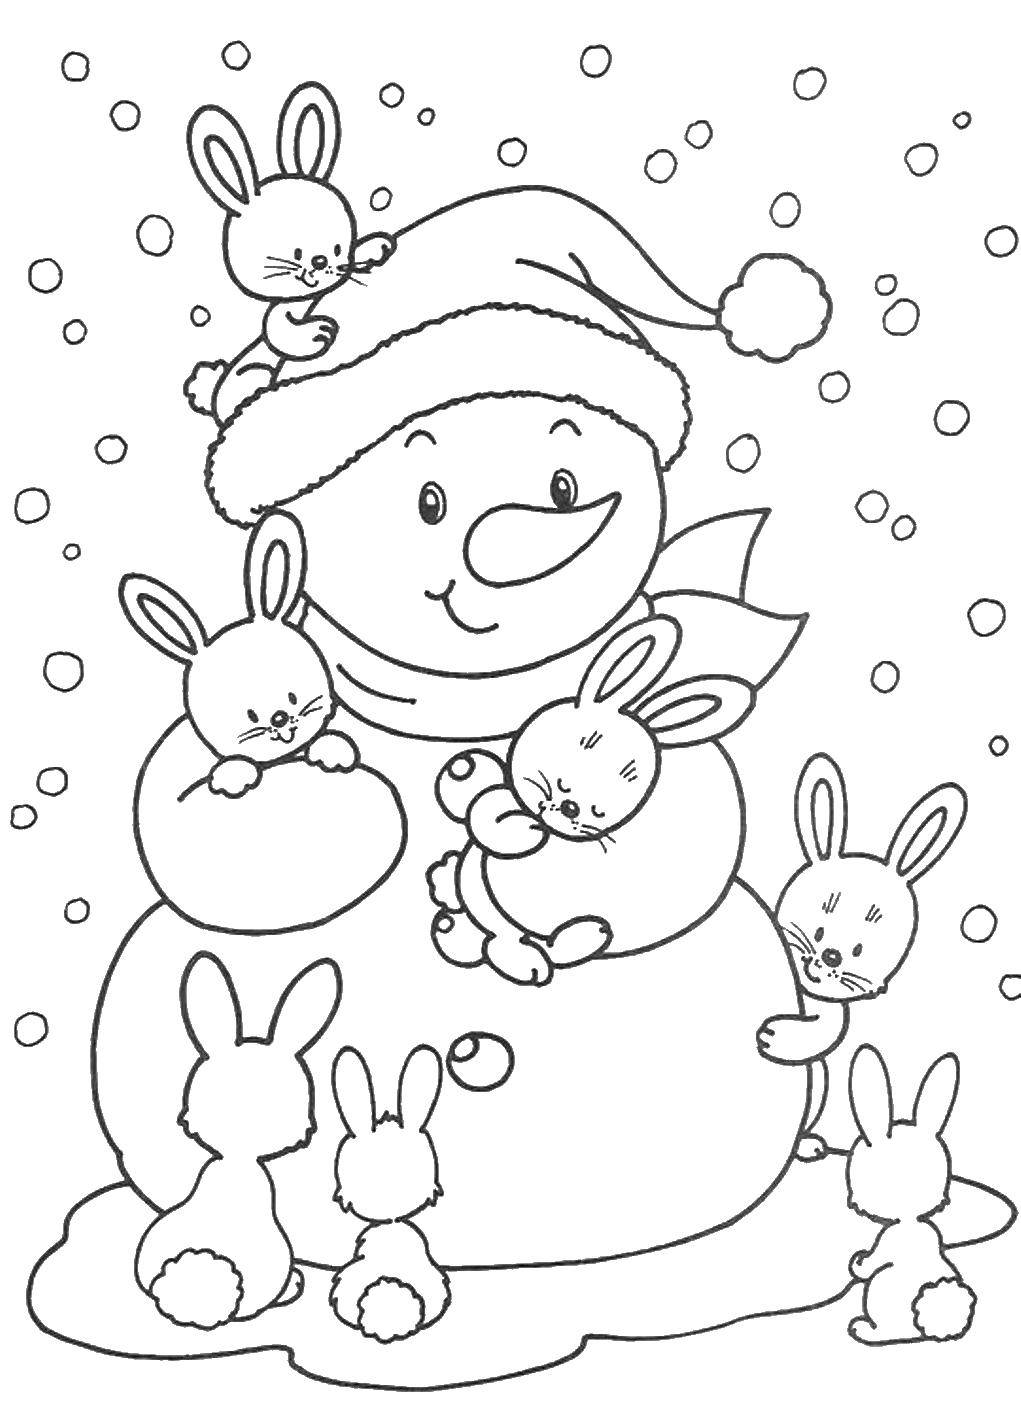 Coloring Zaichiki and snowman. Category winter. Tags:  snowman, bunnies.